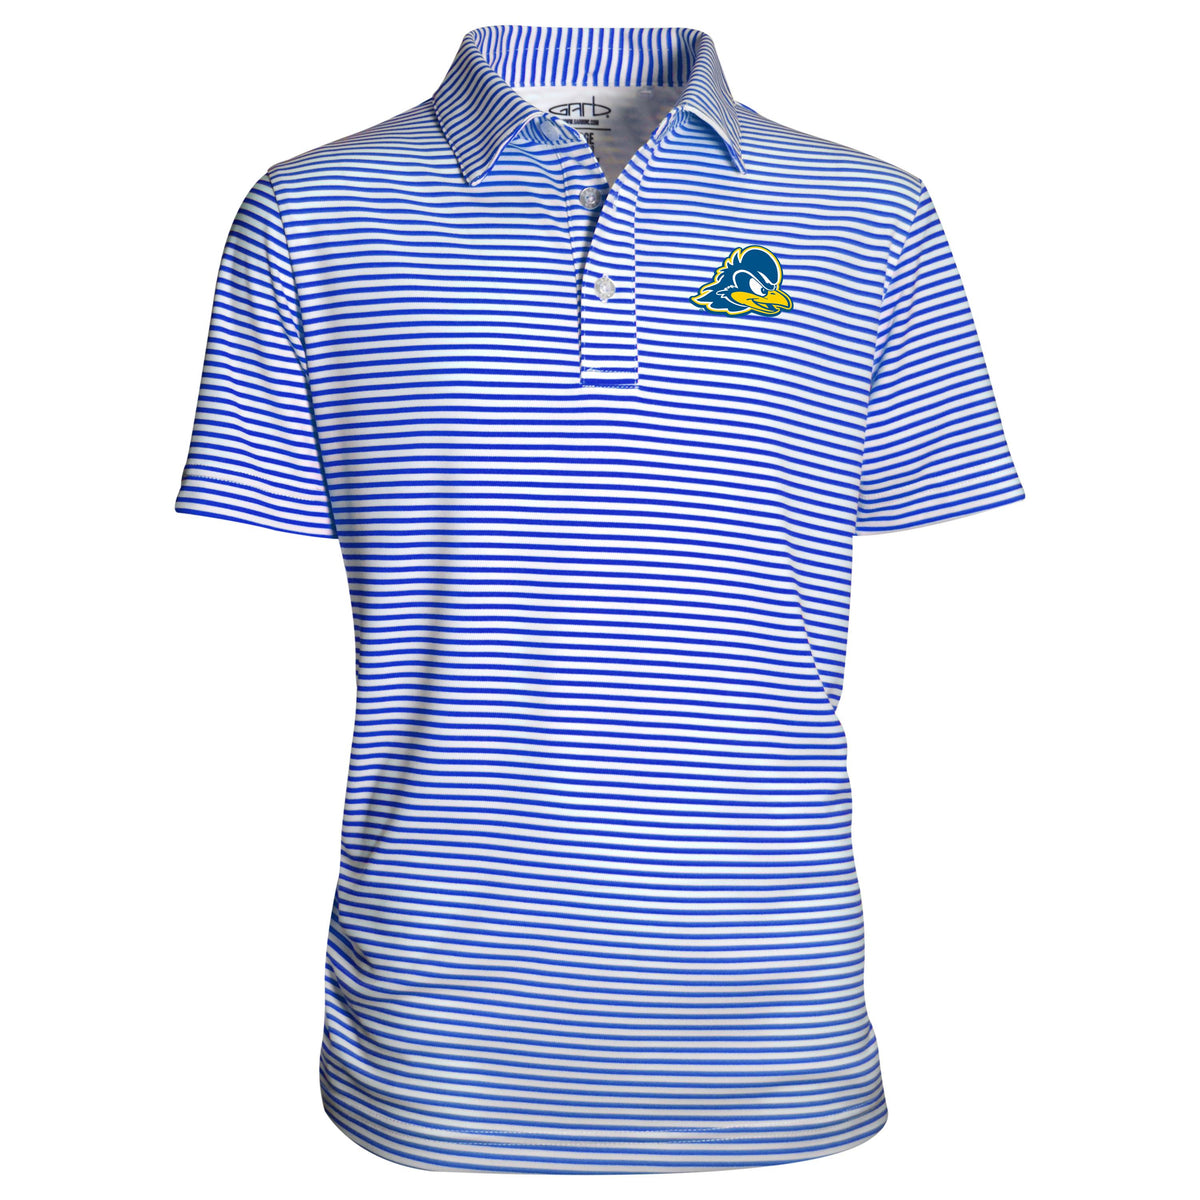 Delaware Blue Hens Youth Boys' Polo